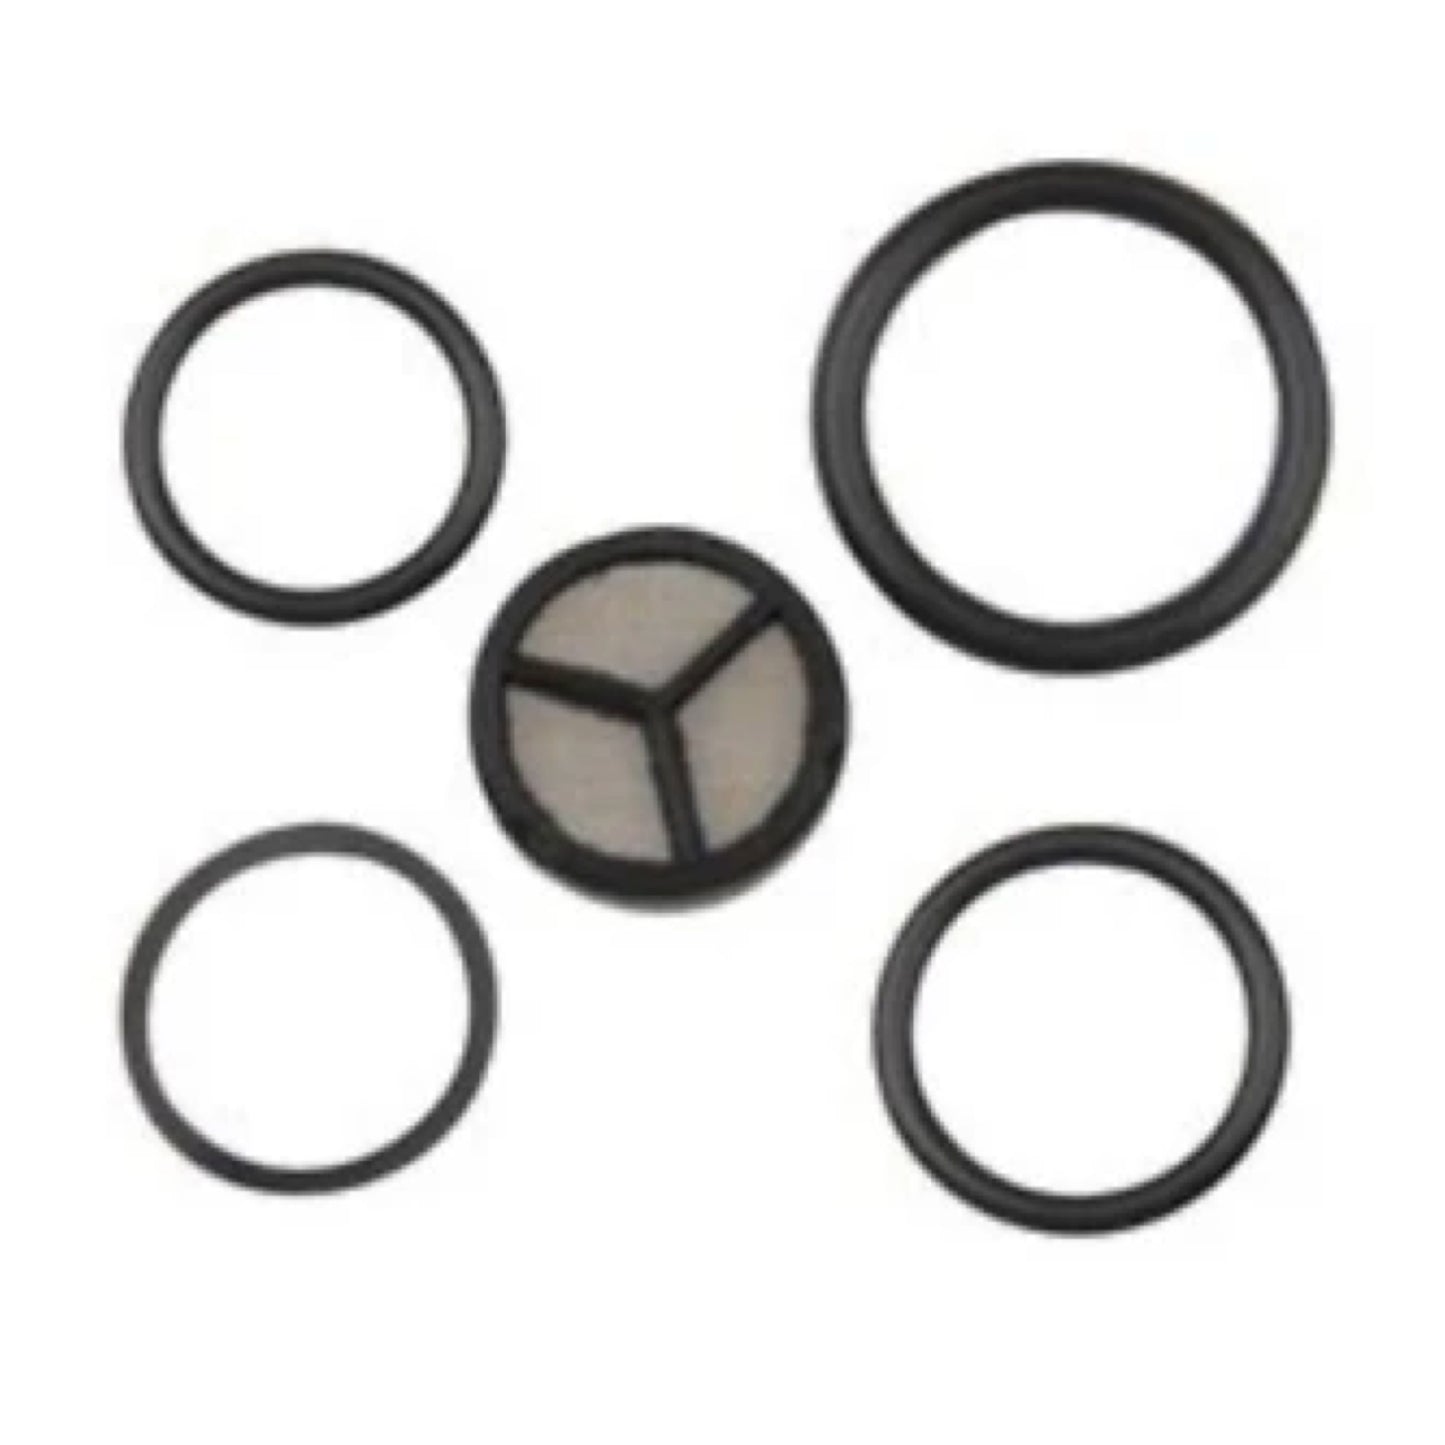 IPR Valve Screen Seal Kit for 2004 - 2010 6.0L Super Duty Ford Powerstroke